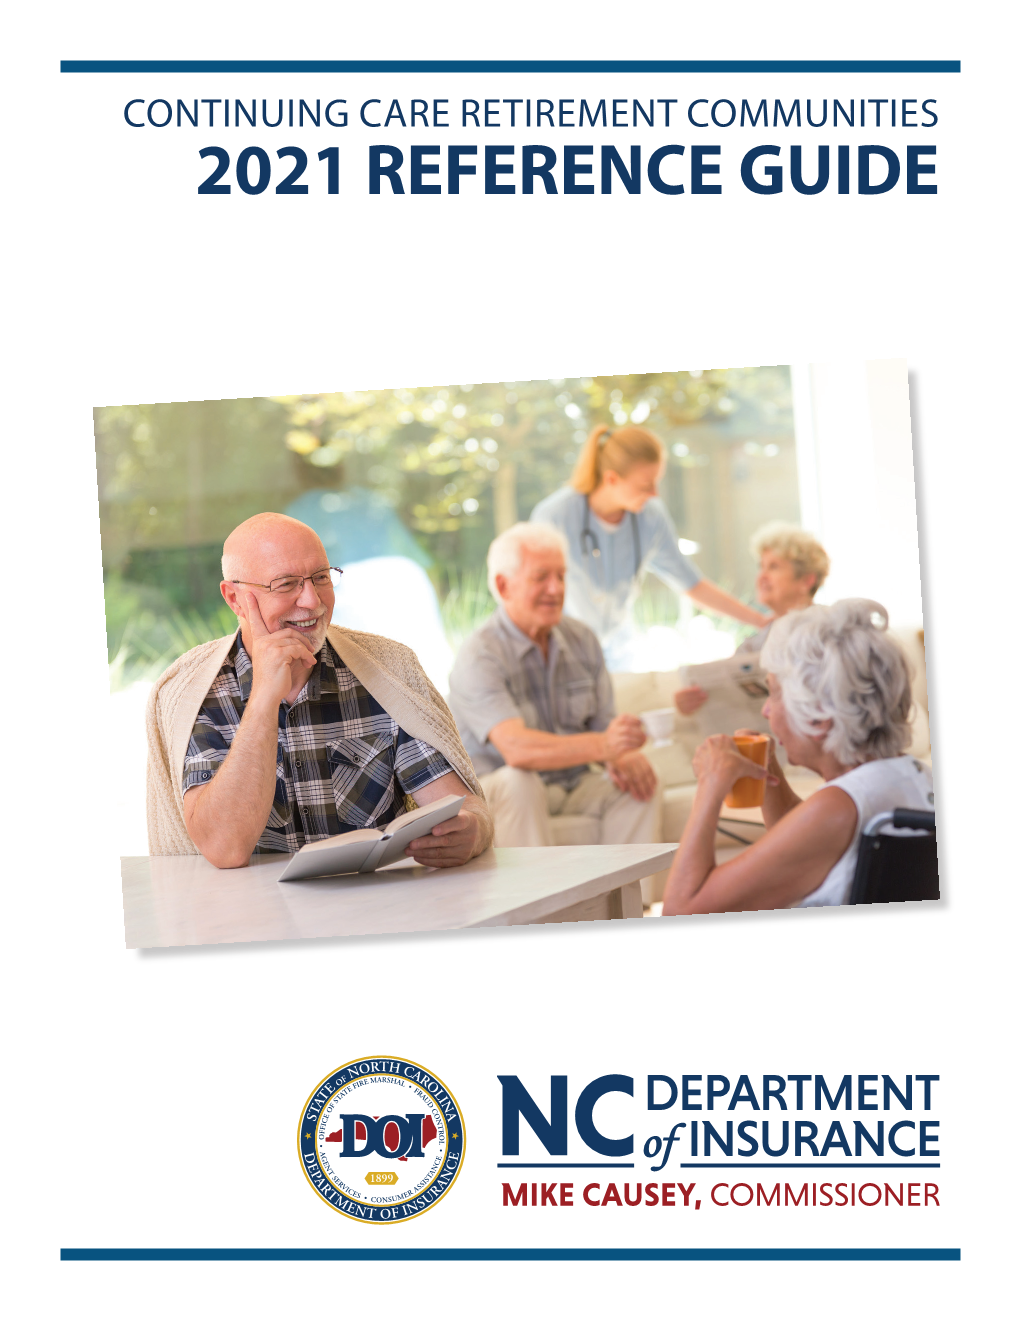 CONTINUING CARE RETIREMENT COMMUNITIES 2021 REFERENCE GUIDE the N.C